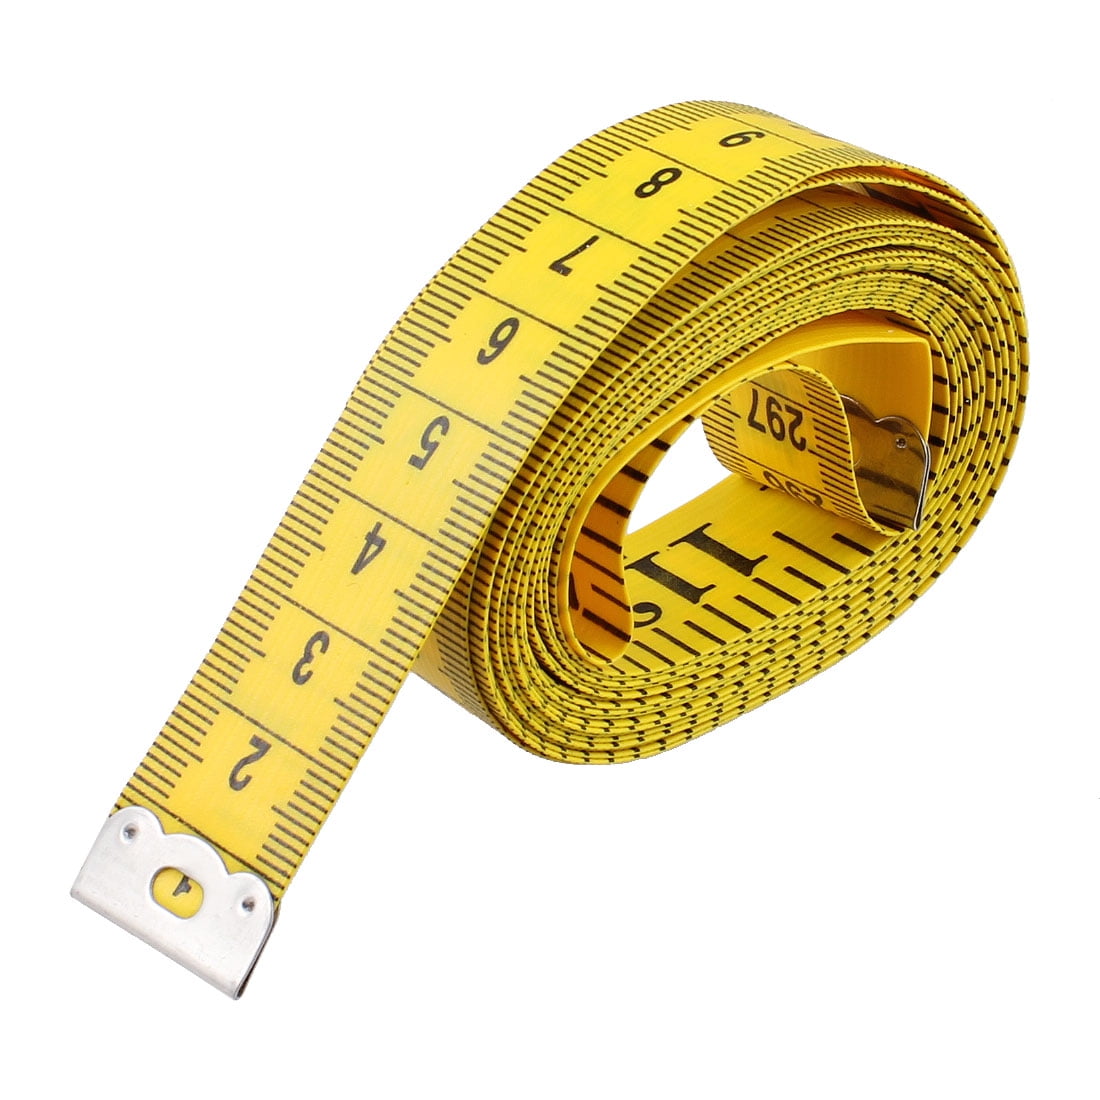 Retractable Key Chain Mini Tape Measure 120 Inches/300cm Pink Tape Measure for Body Measuring Tape Double Scale Body Sewing Flexible Ruler for Medical Body Measurement Tailor Craft Ruler